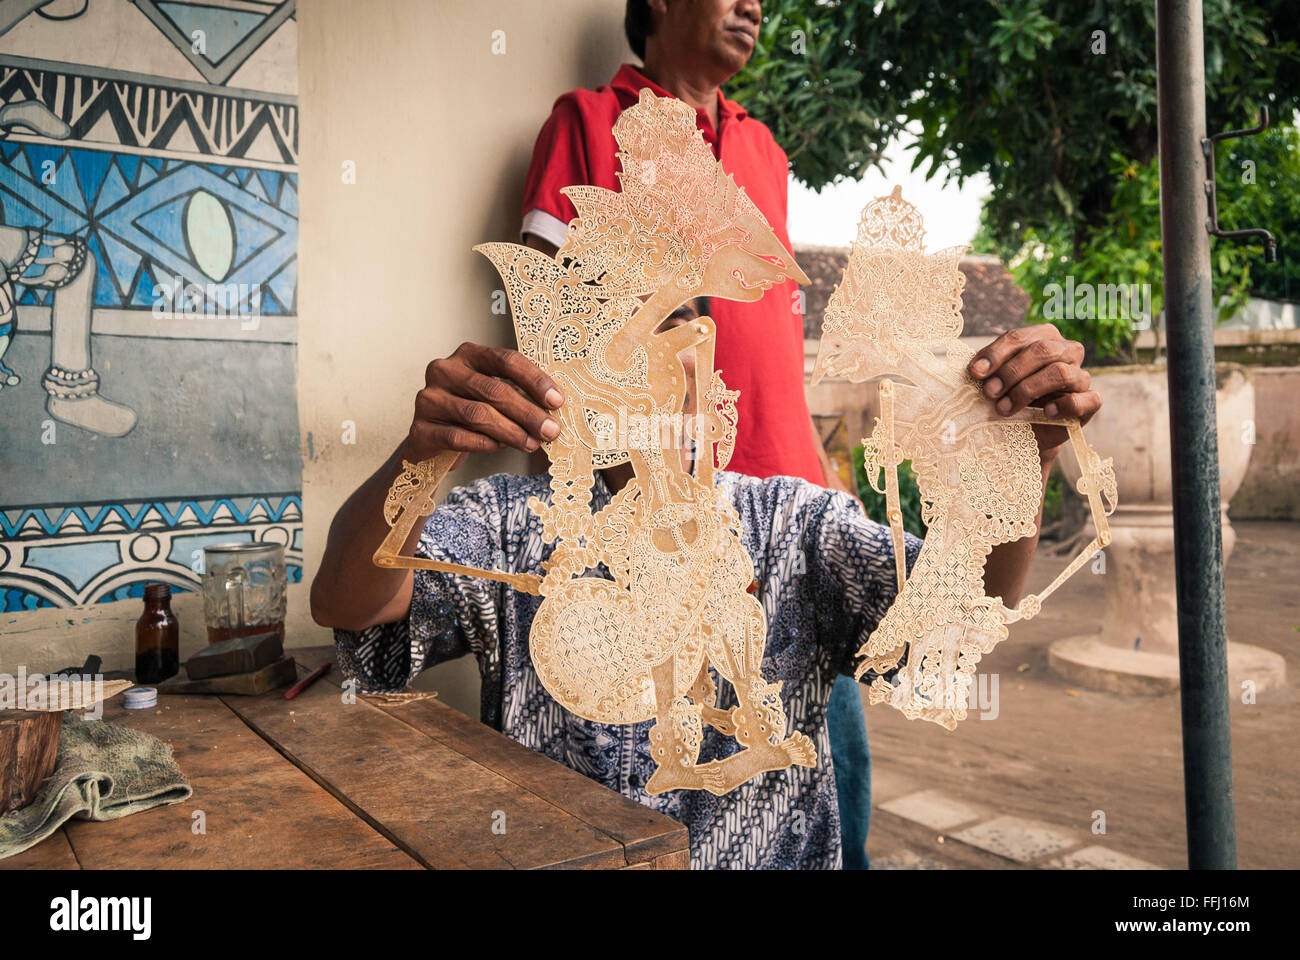 A craftsman at the Taman Sari Palace in Yogyakarta, Indonesia displaying two unfinished Wayang puppets sculpted in buffalo skin. Stock Photo